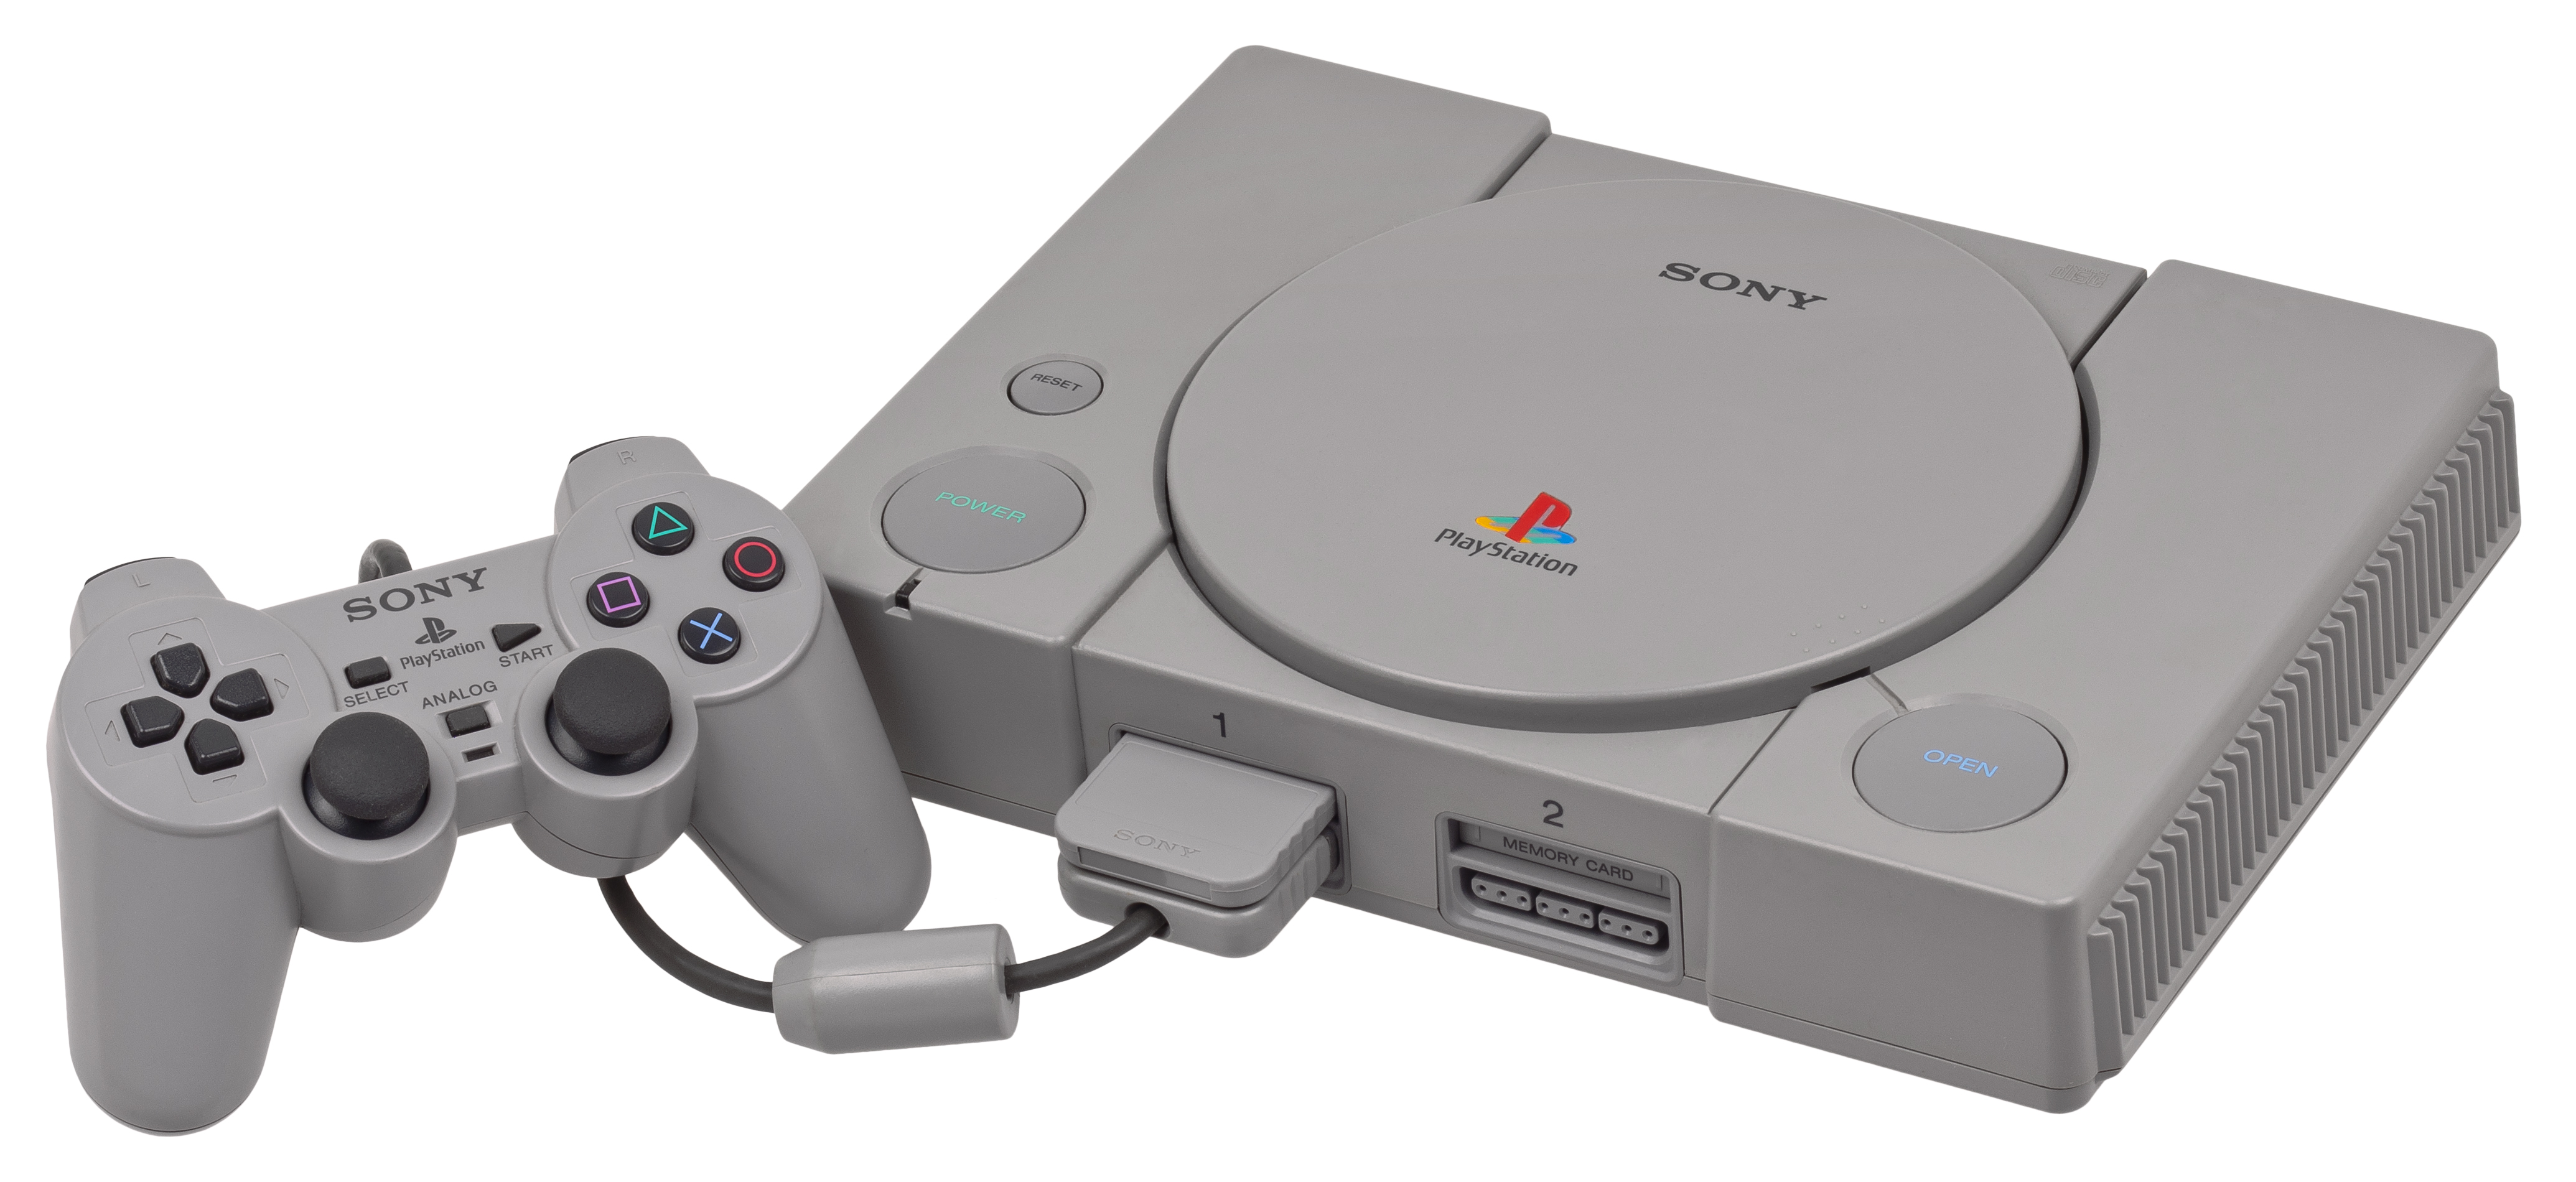 How to Softmod Your PS1 with FreePSXBoot & tonyhax! 